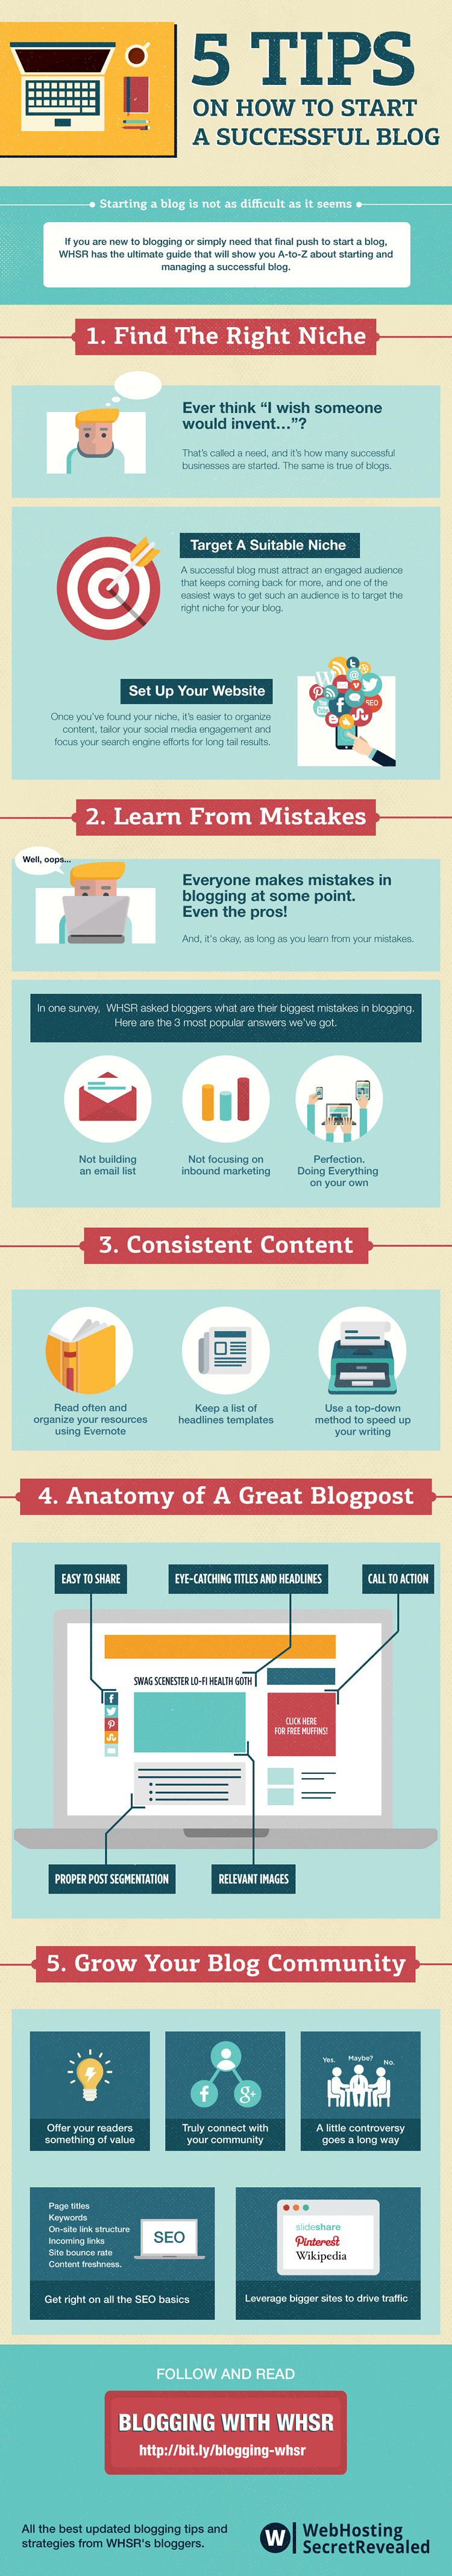 infographic successful blog